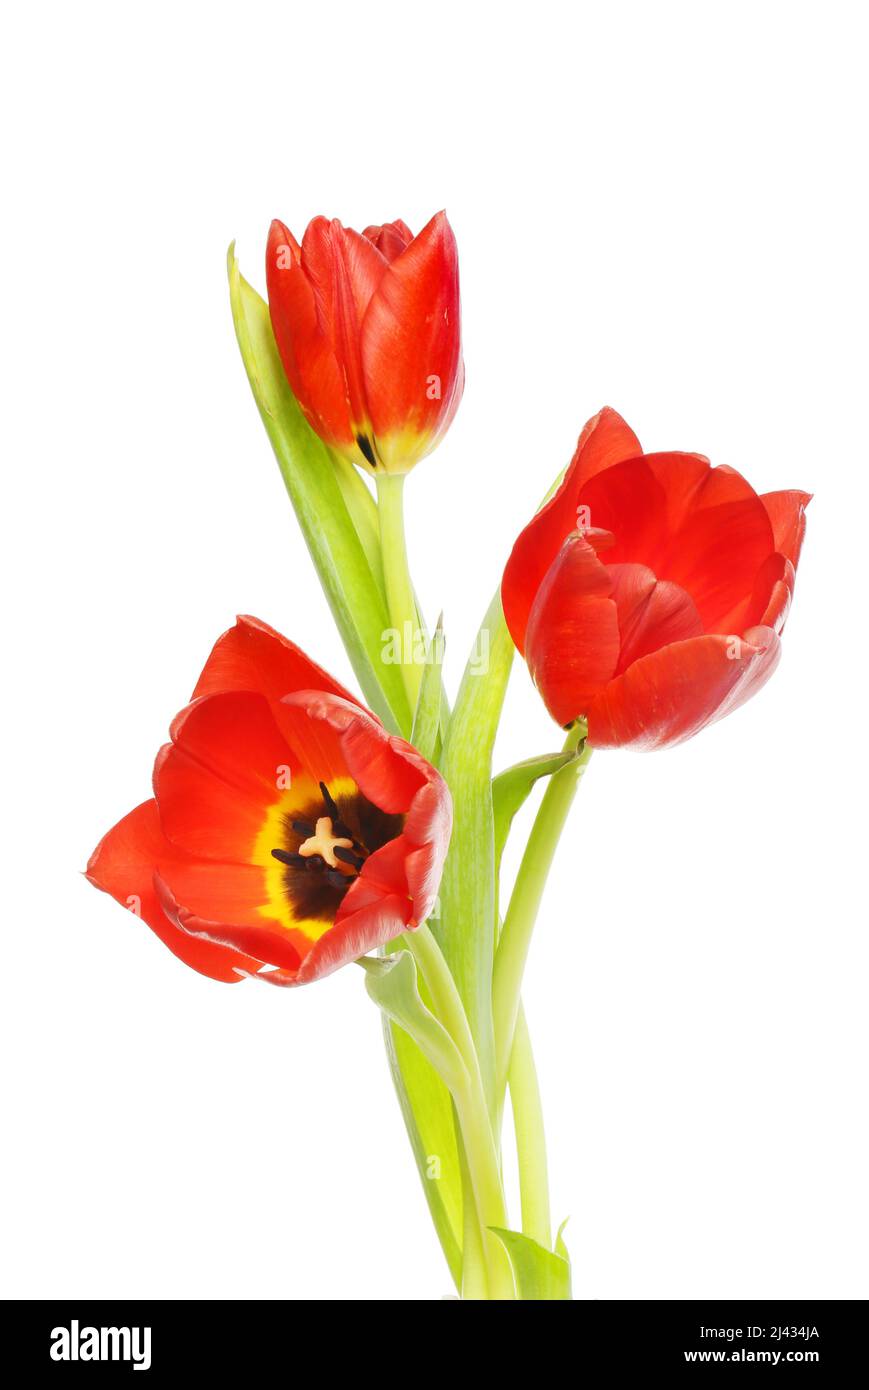 Three red tulip flowers isolated against white Stock Photo